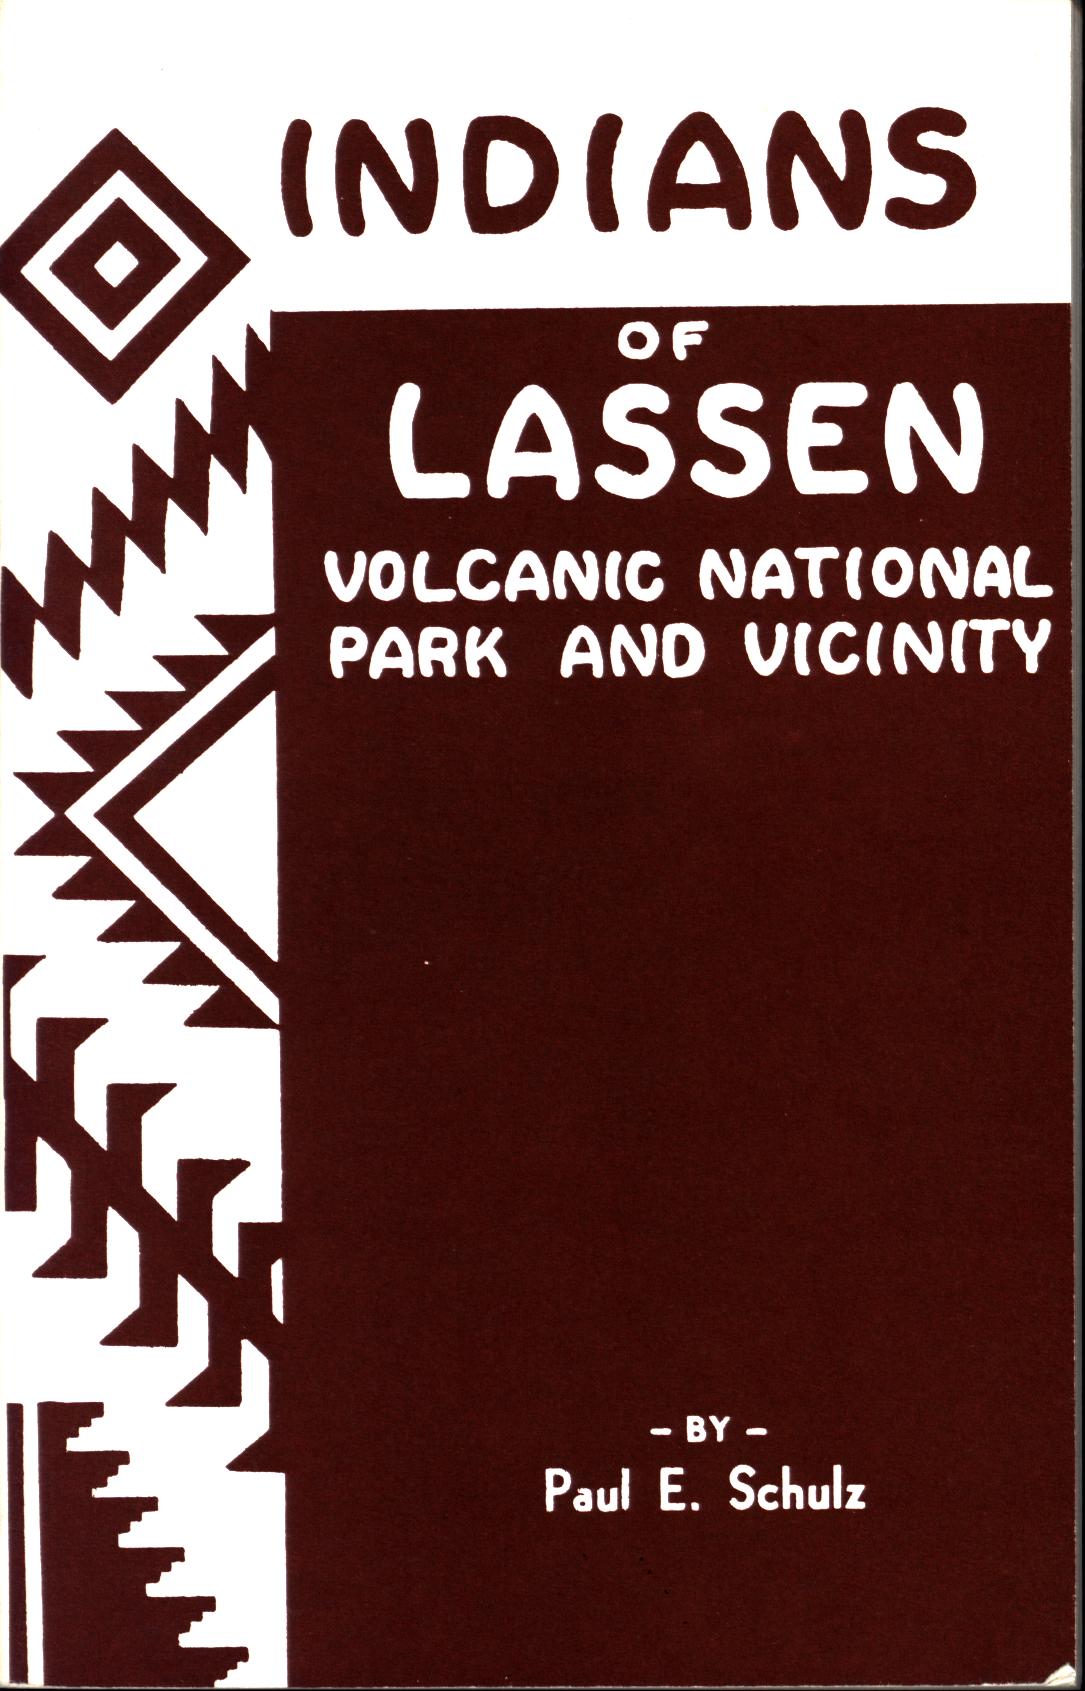 INDIANS OF LASSEN VOLCANIC NATIONAL PARK AND VICINITY. 